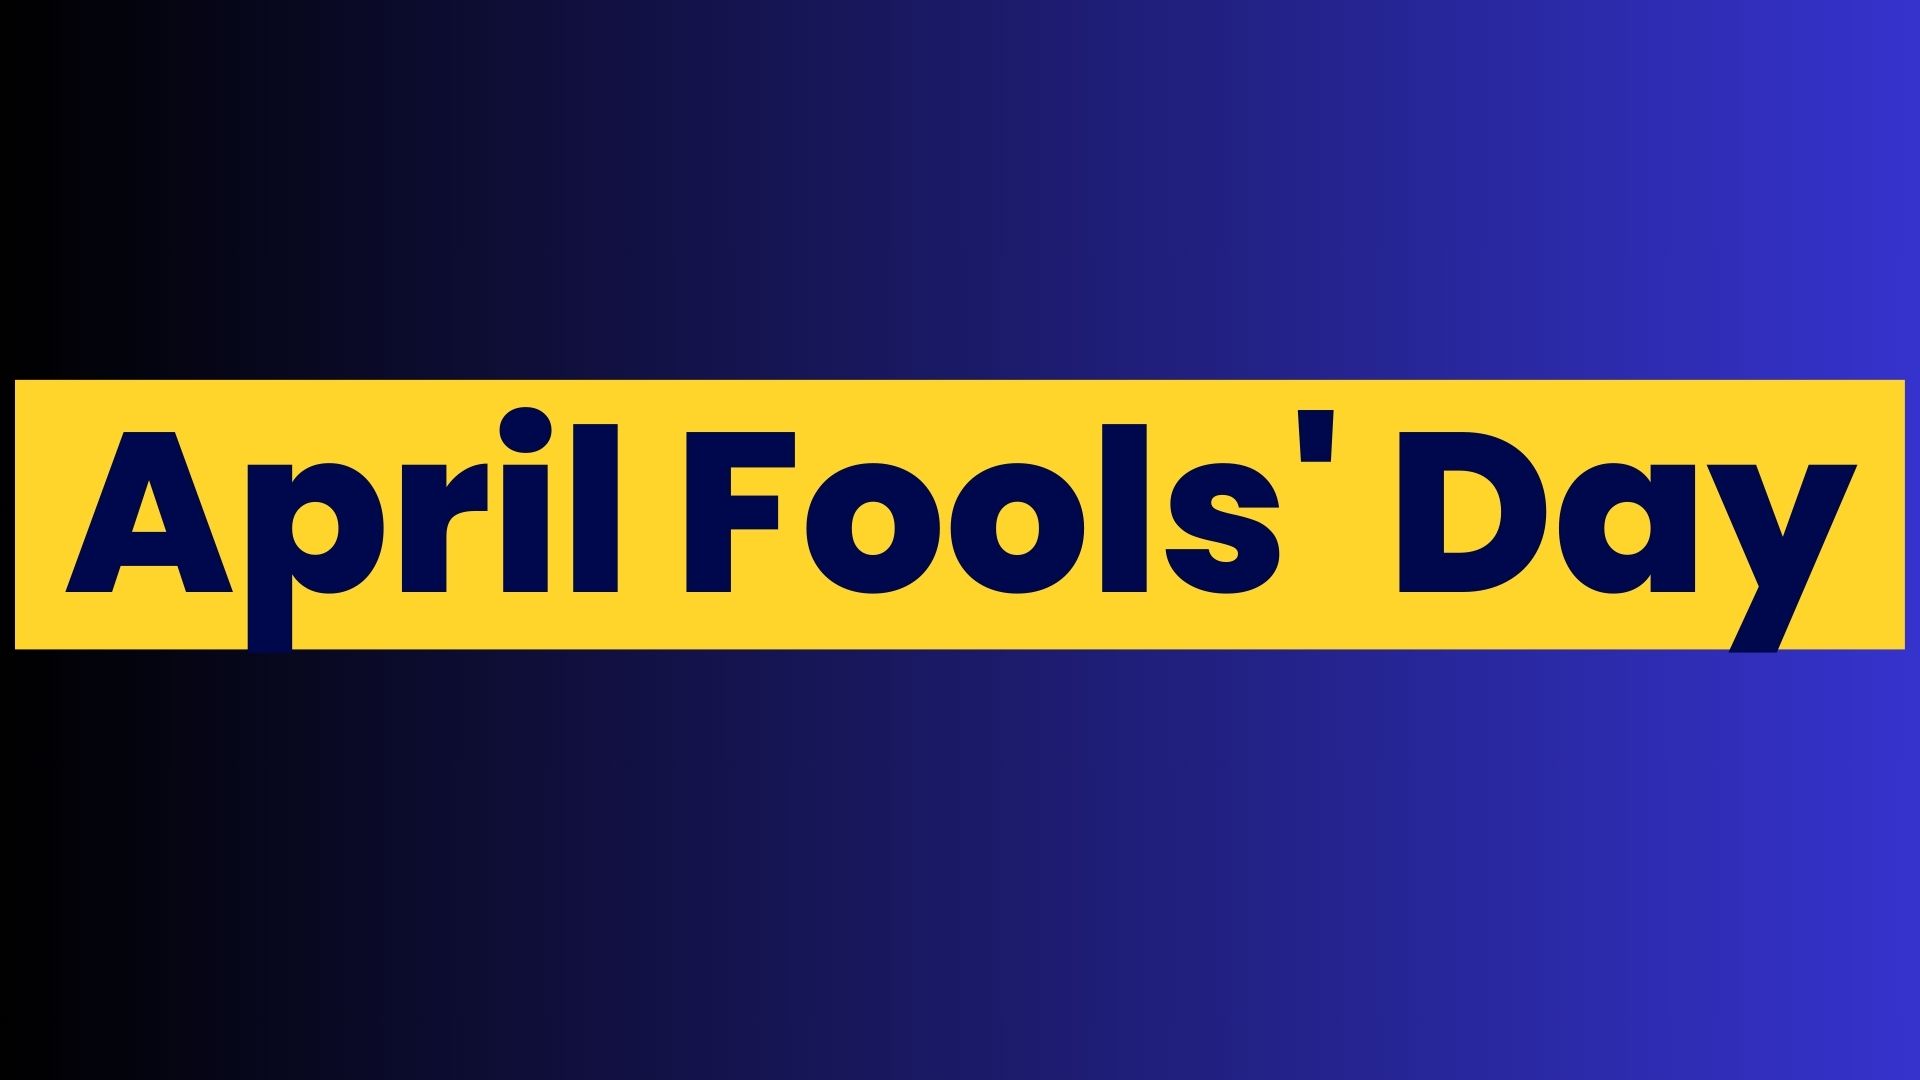 Why do we celebrate ‘April 1’ as ‘April Fools’ Day’